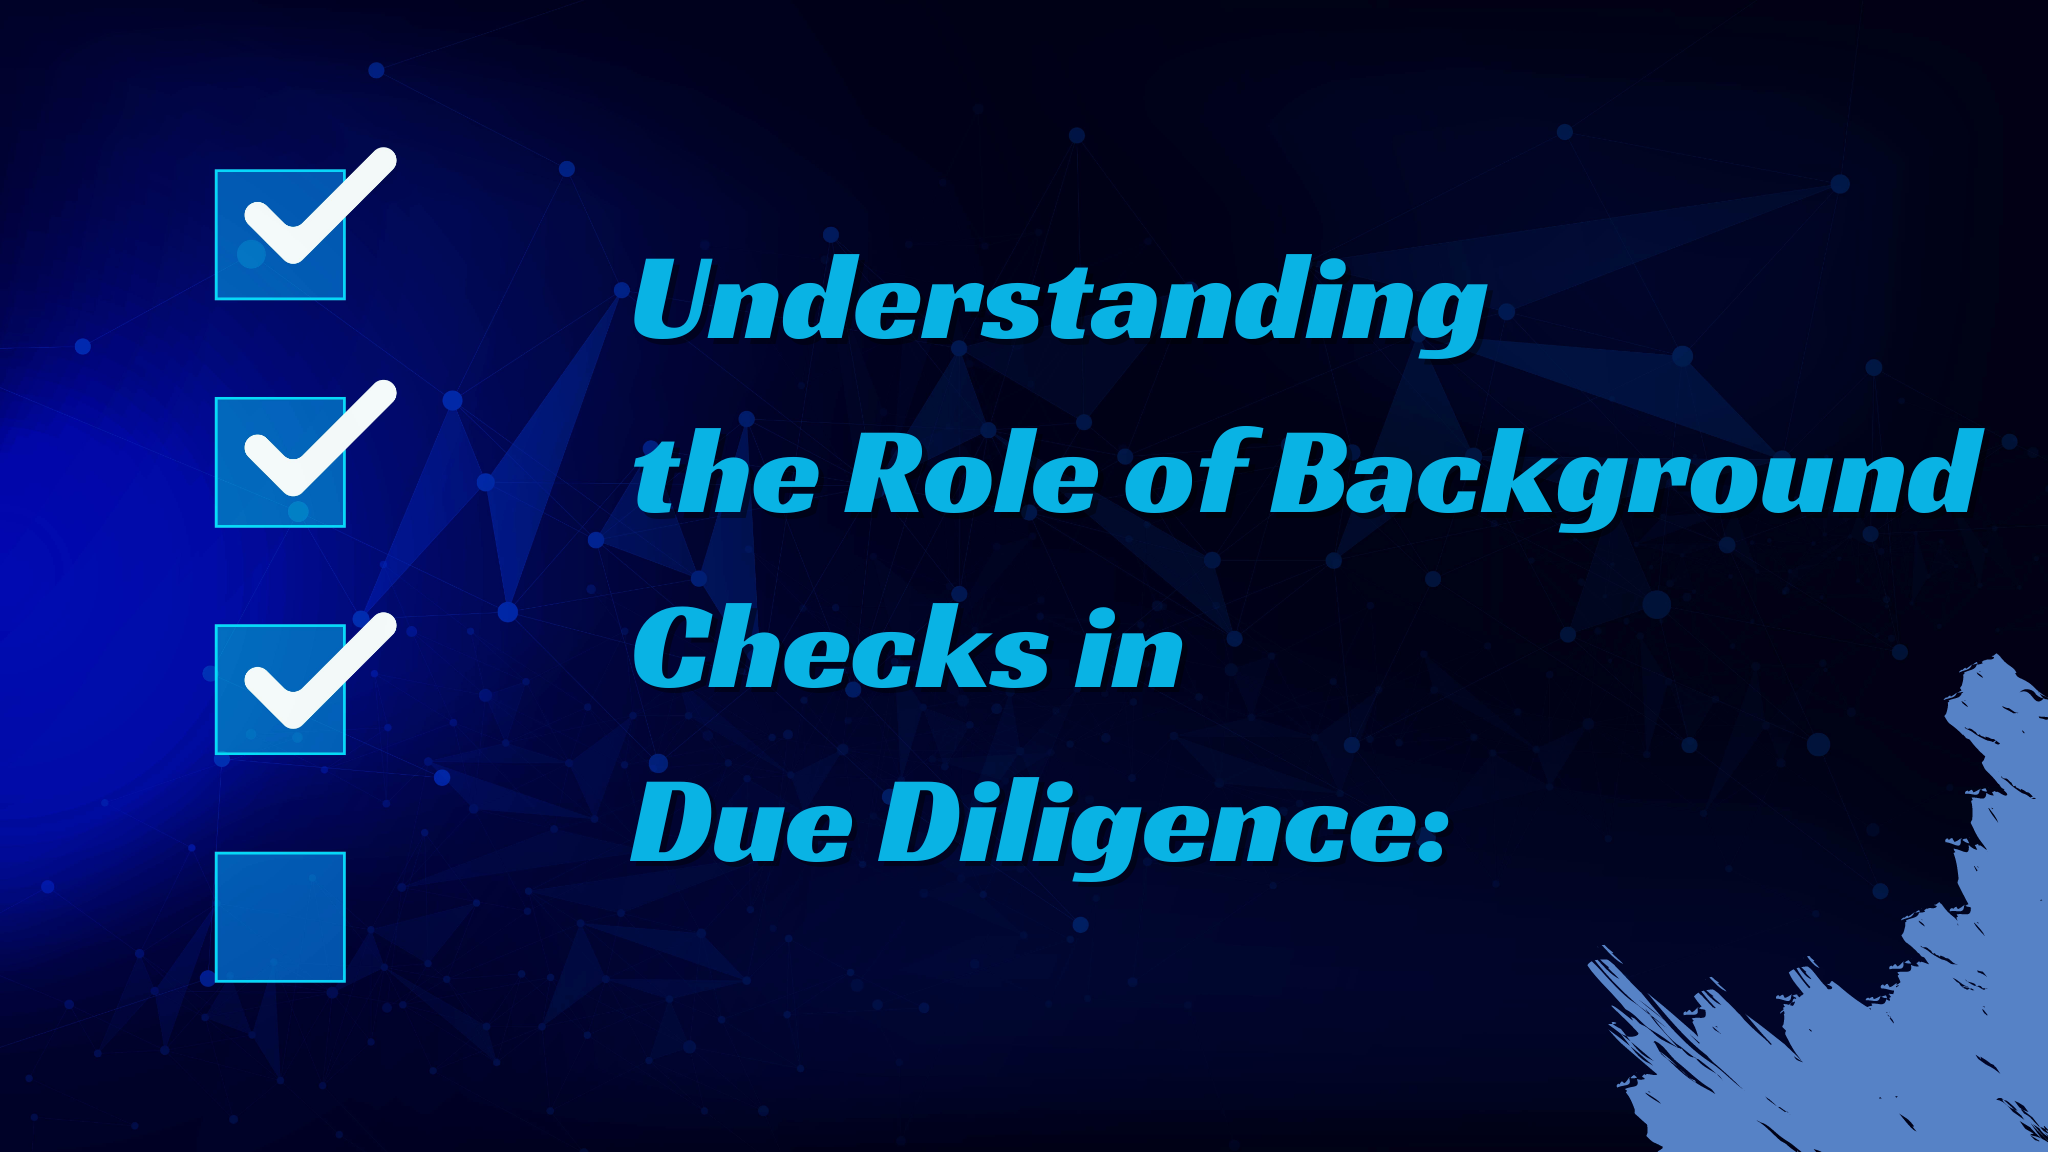 Understanding the Role of Background Checks in Due Diligence: